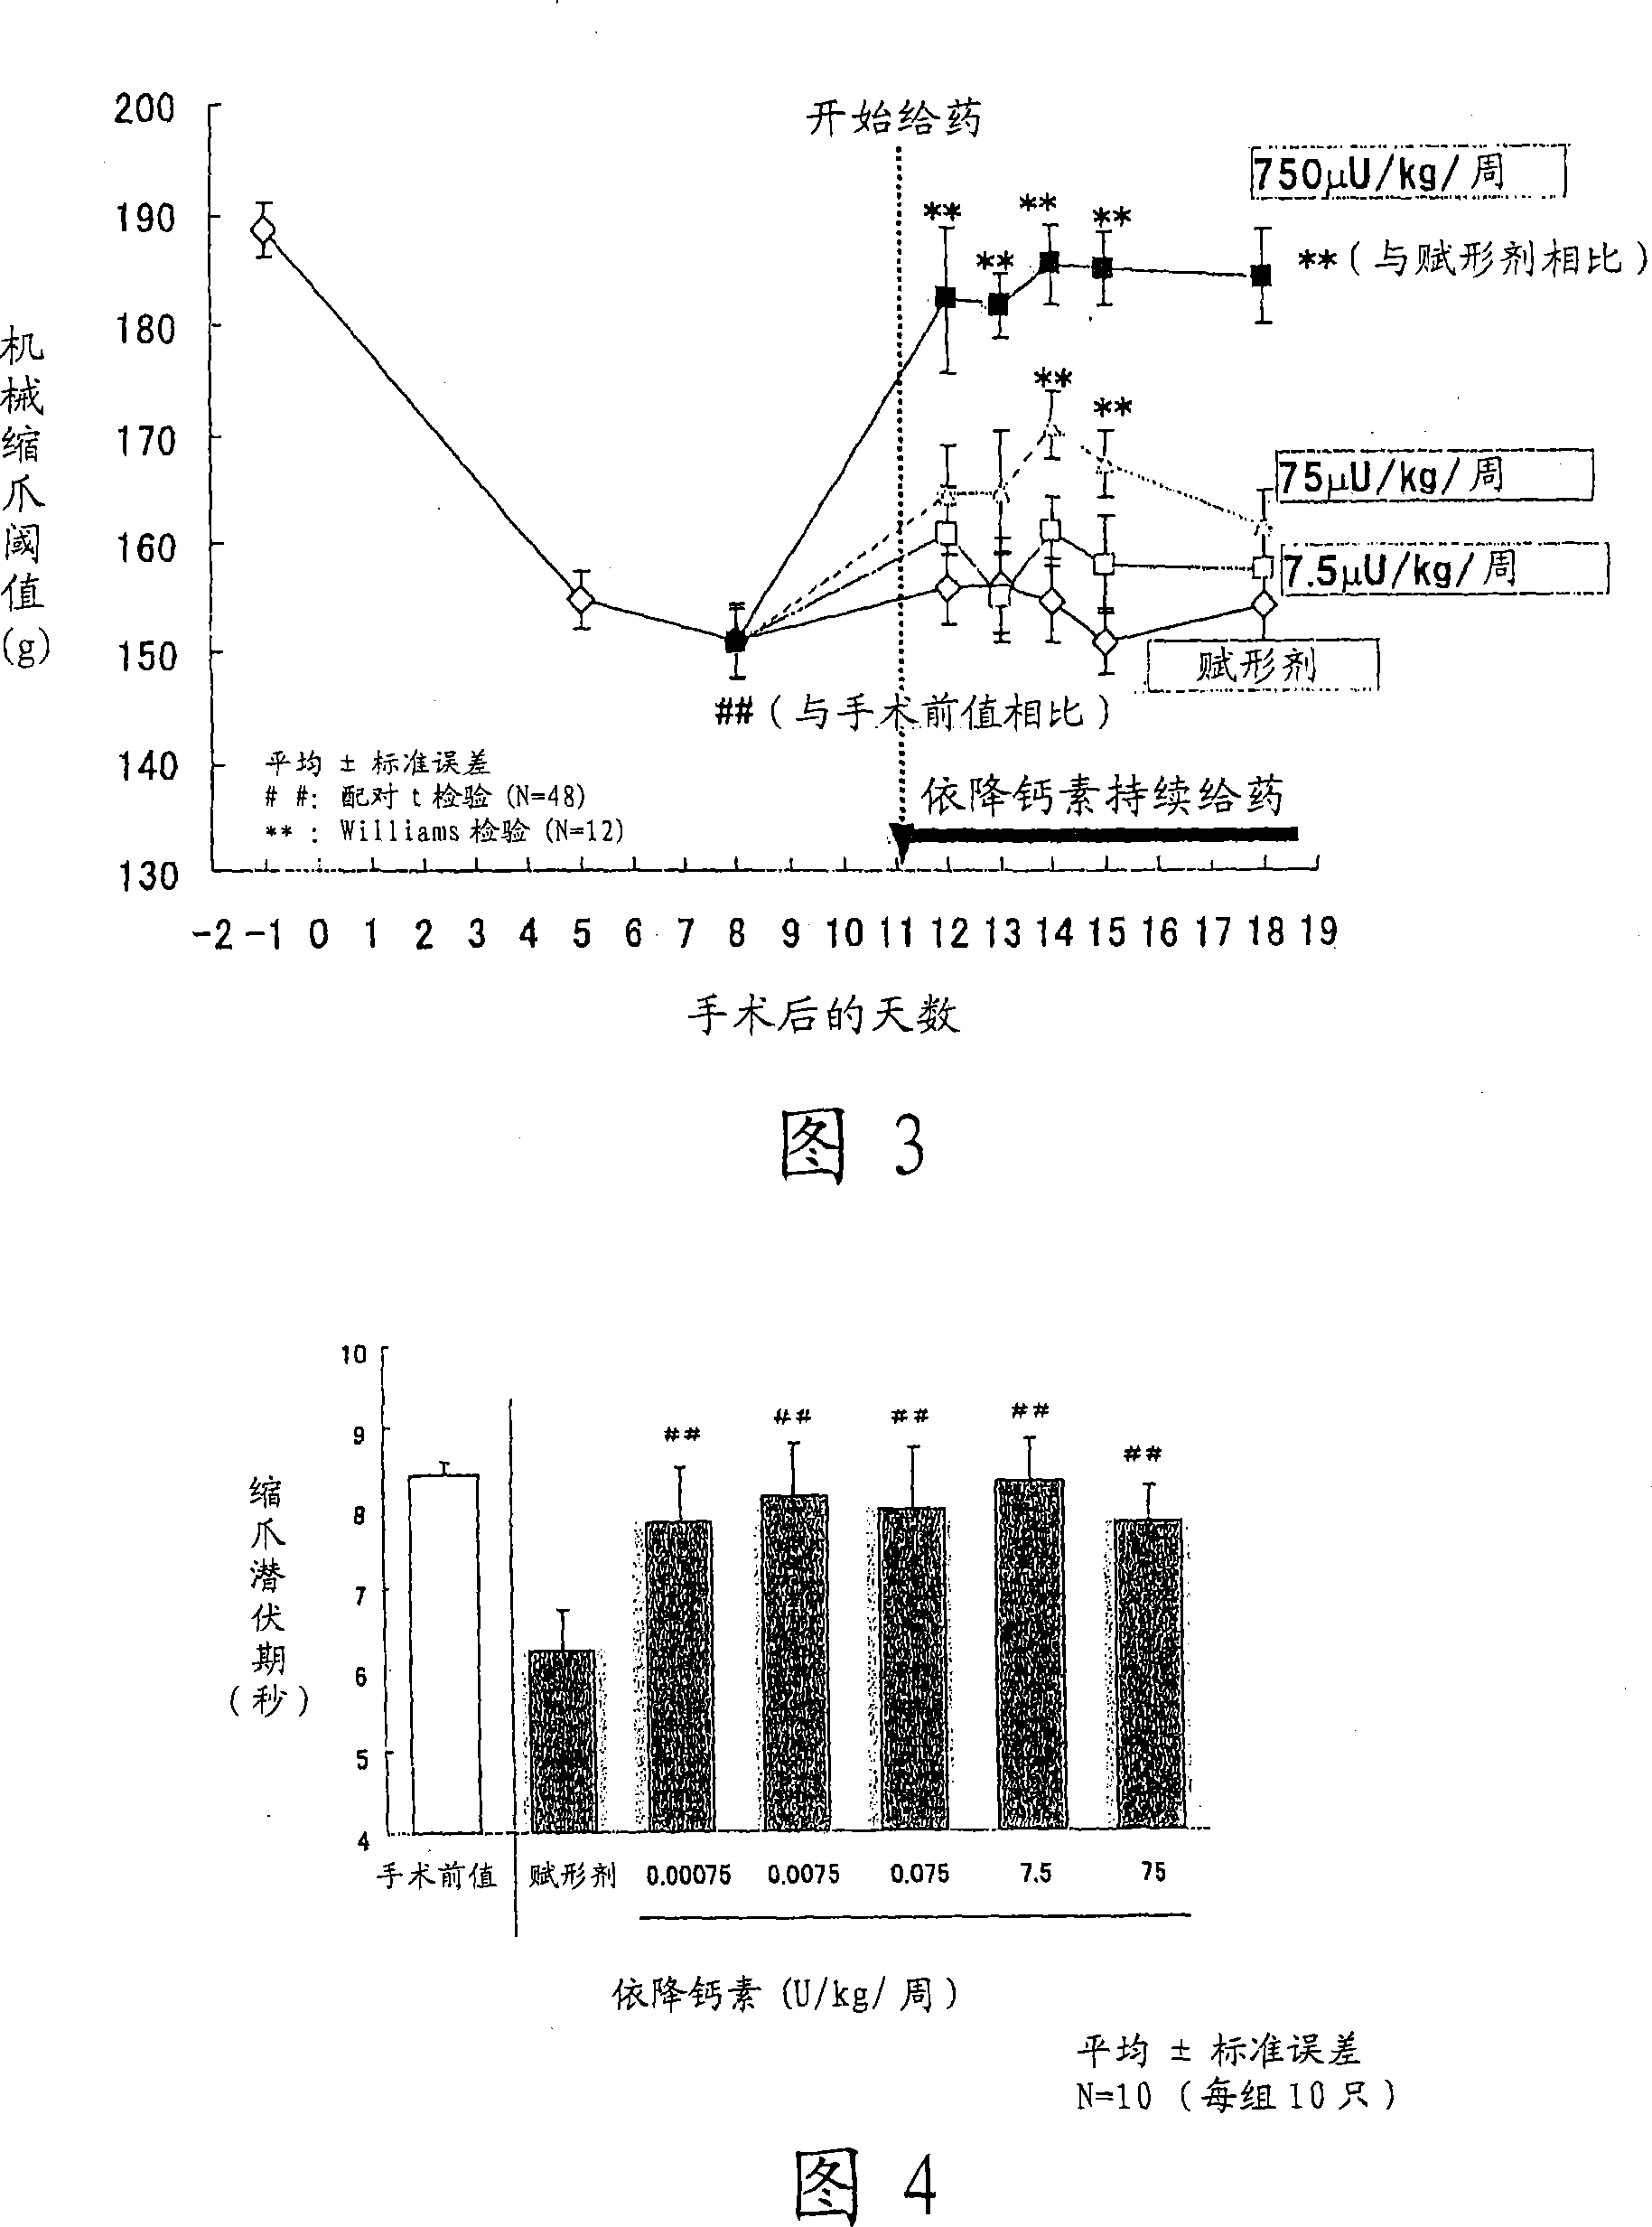 Agent for treating and/or preventing of neuropathic pain